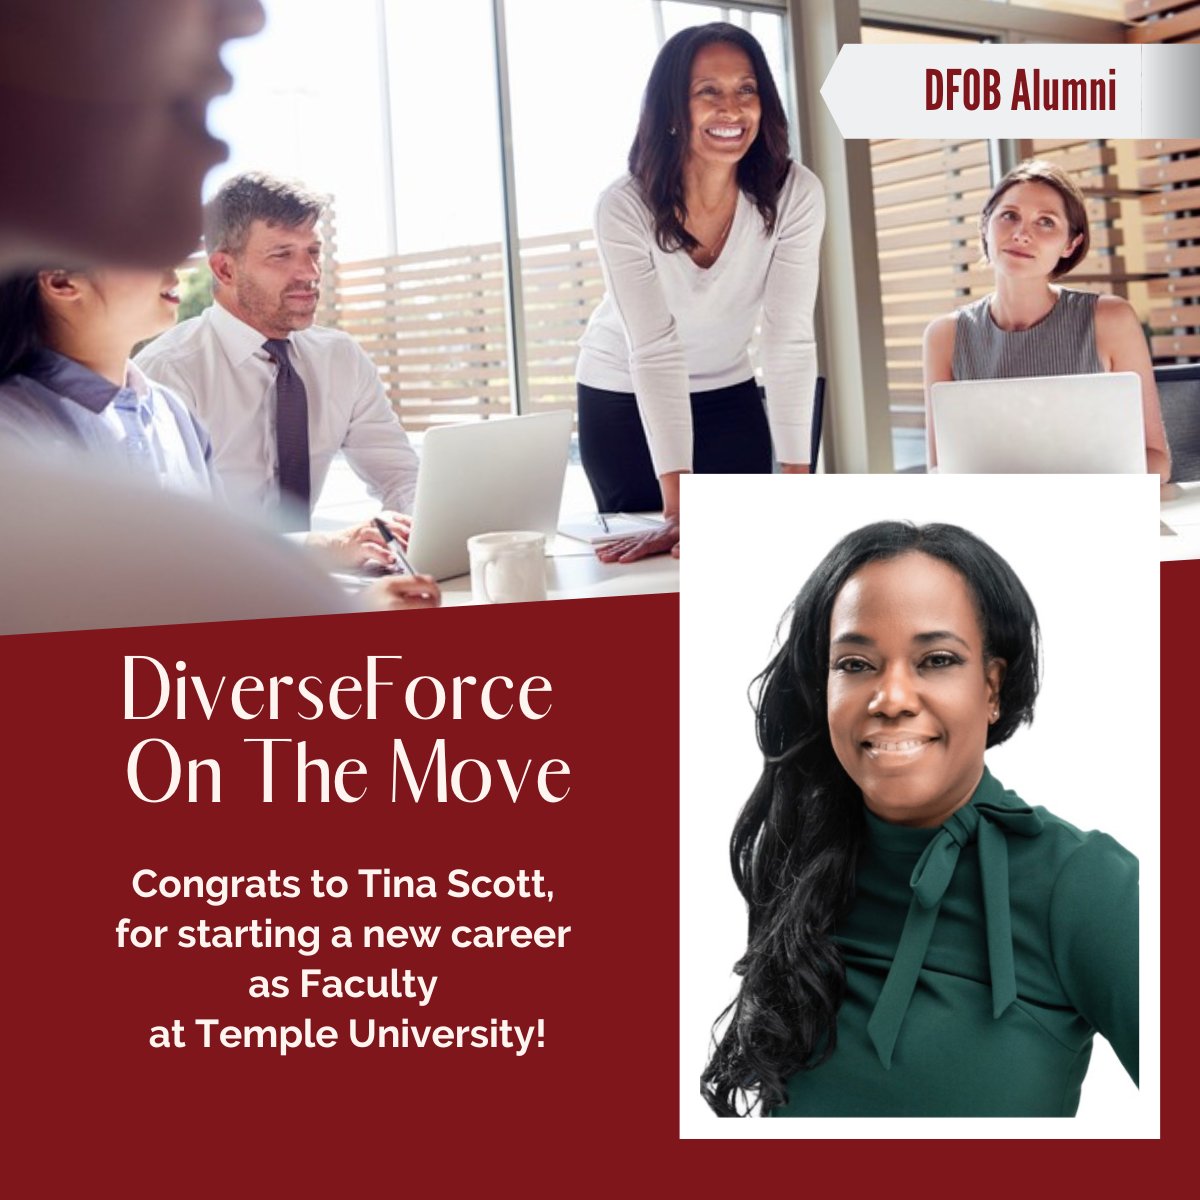 Congrats to Tina Scott, for starting a new career as Faculty at Temple University! #diverseforce, #diverseforceonboards